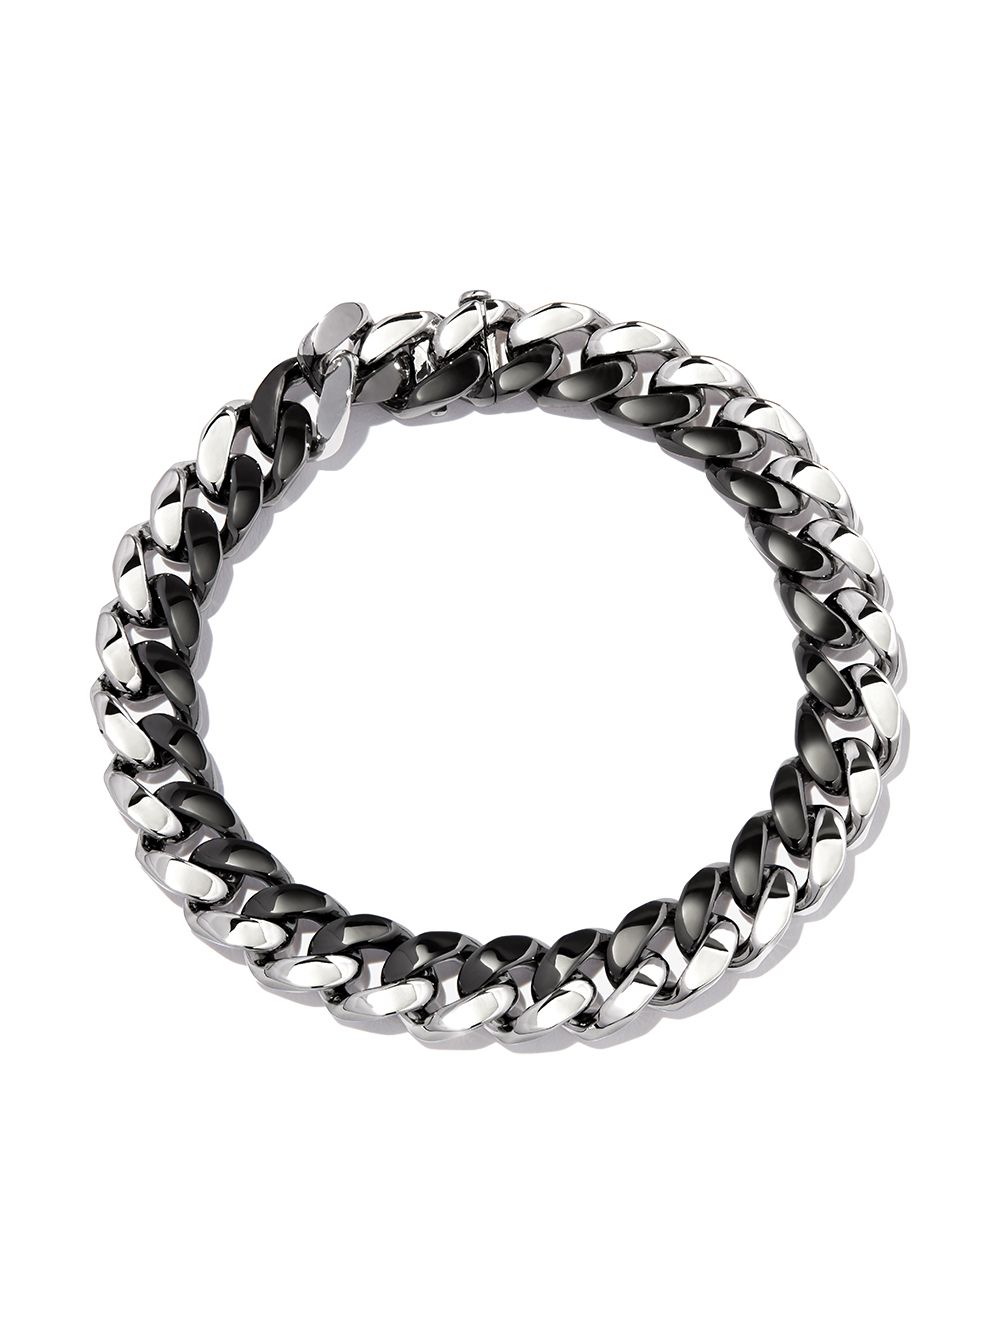 SHAY 18kt white and black gold curb-link bracelet - Silver von SHAY